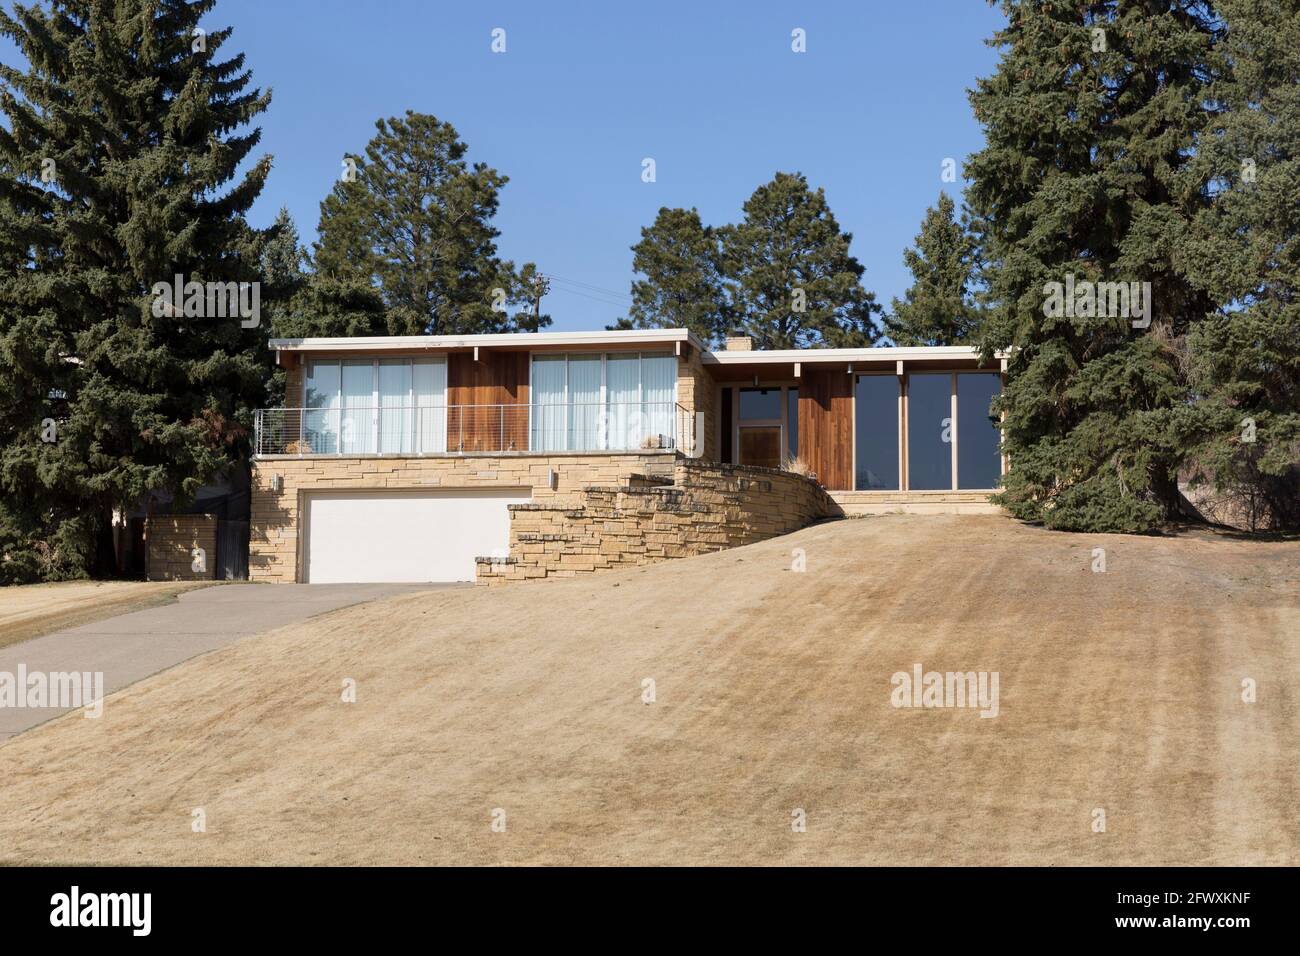 Architecture showing the exterior of a Mid-century modern MCM ranch-style house with a brown dormant front lawn. Stock Photo